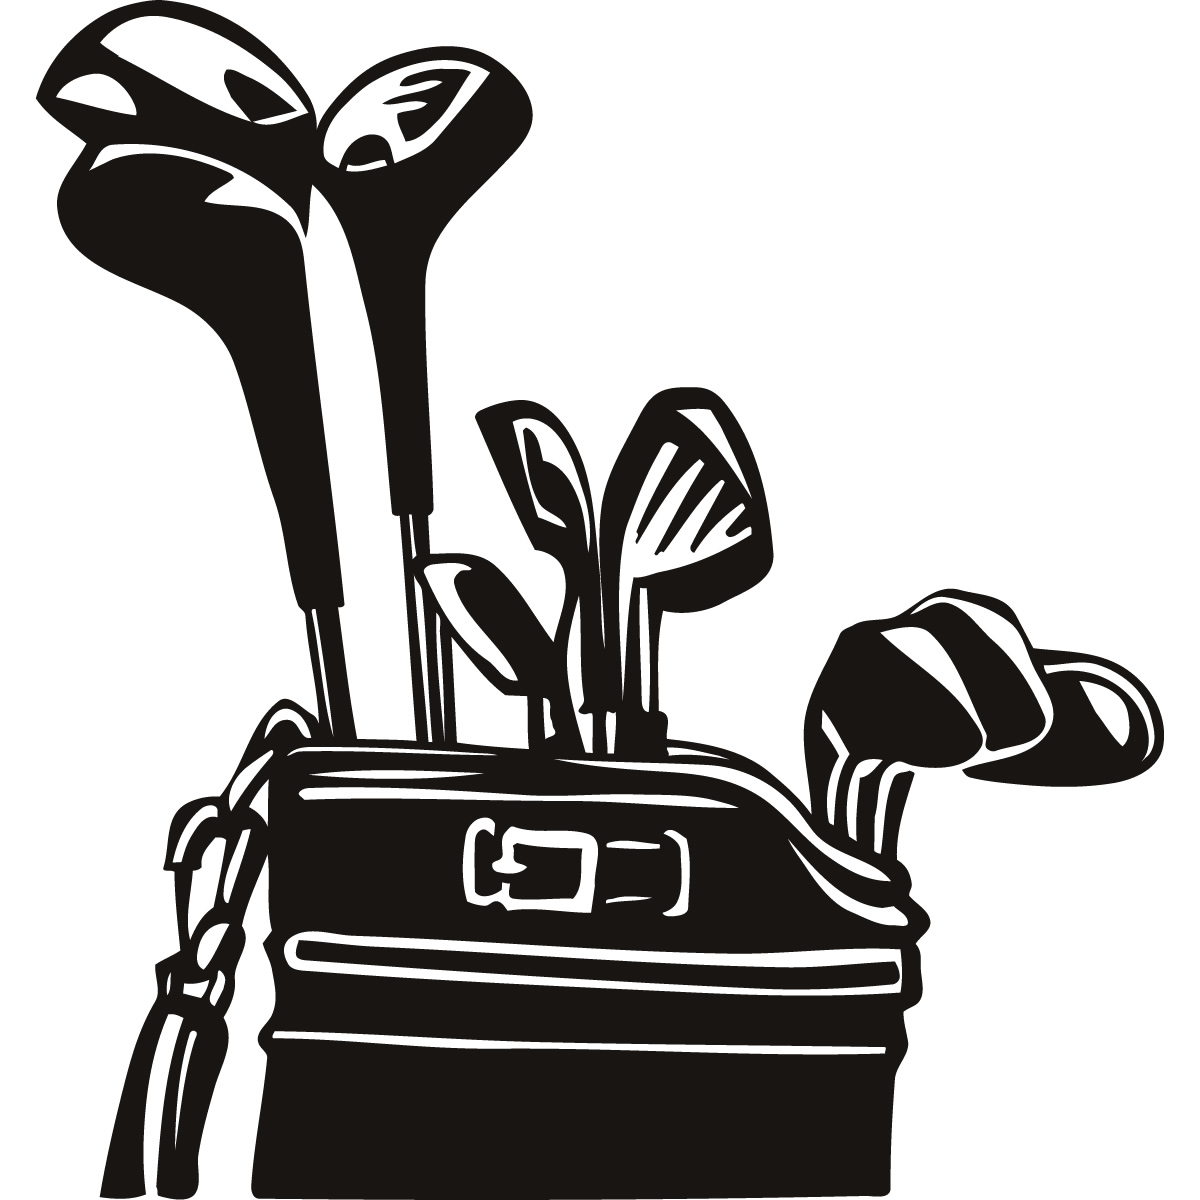 Pictures Of Golf Clubs - ClipArt Best